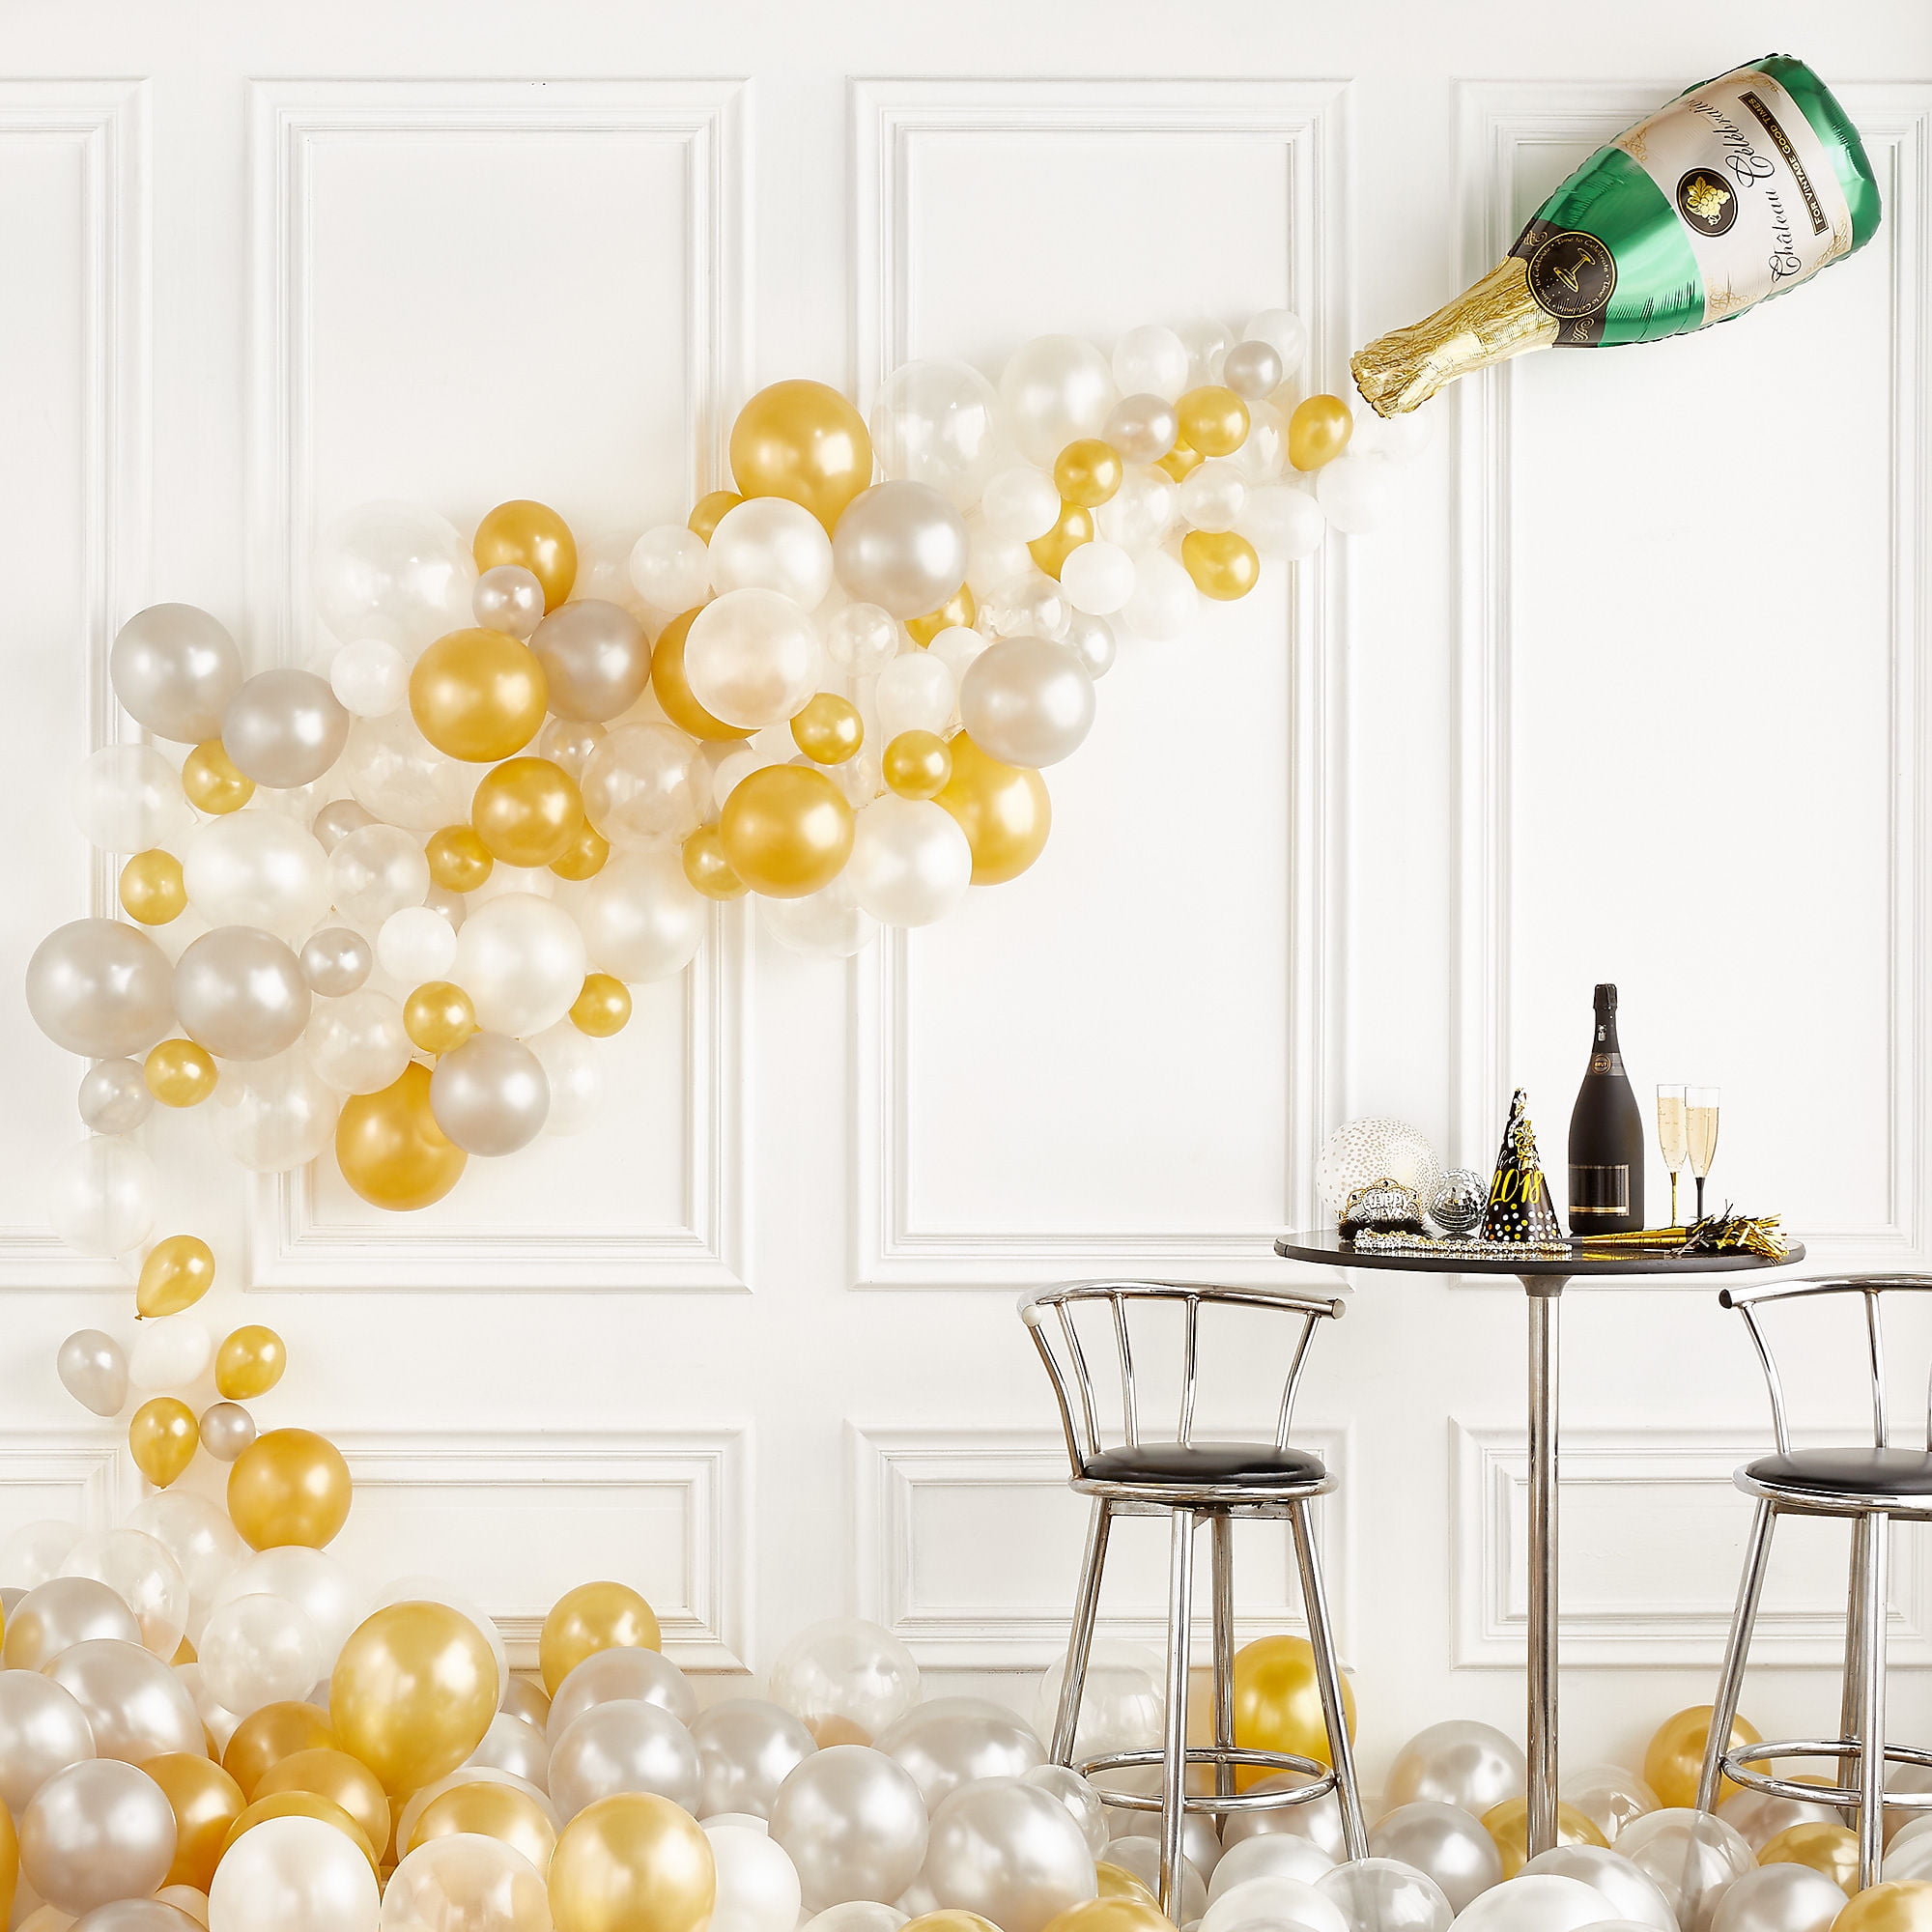 Champagne Bottle Balloon Weight Anniversary Birthday New Year Party Accessories